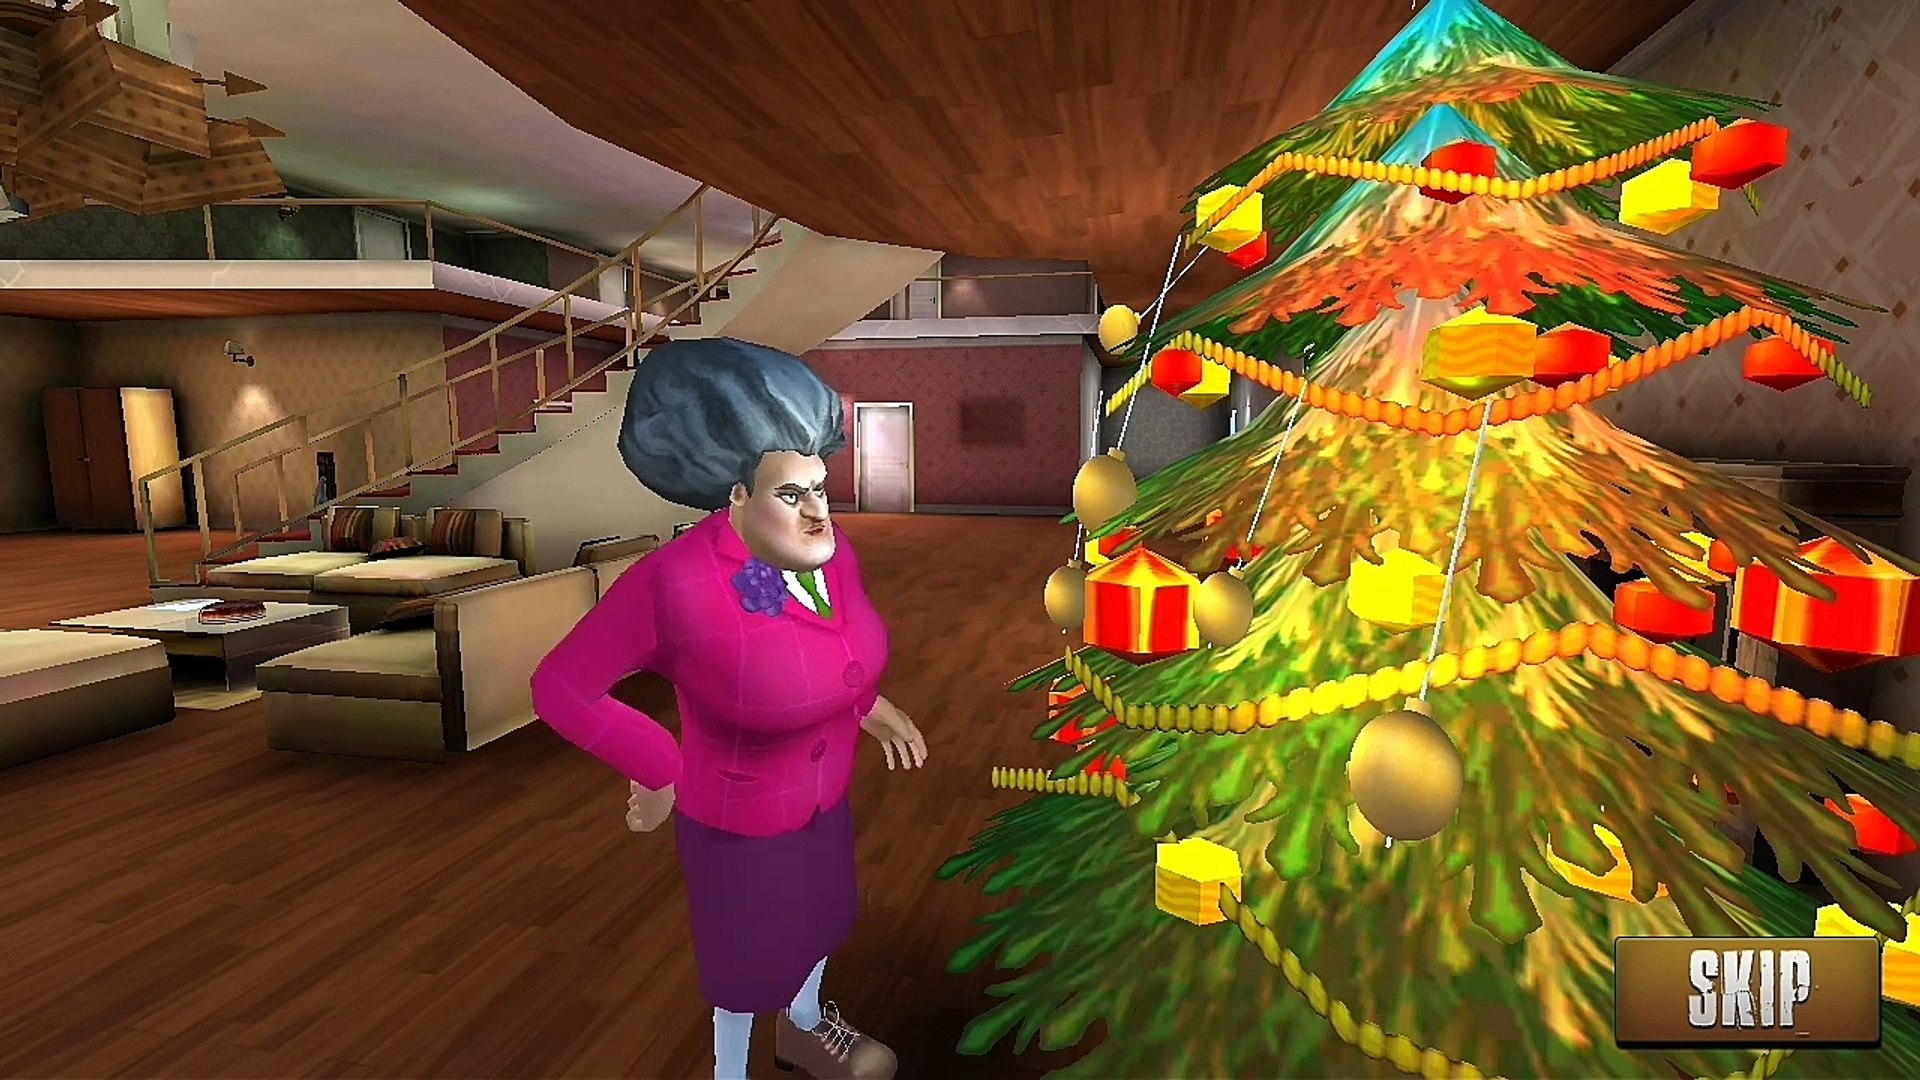 All Levels Scary Teacher 3D [Version 5.3.1] Christmas Update 